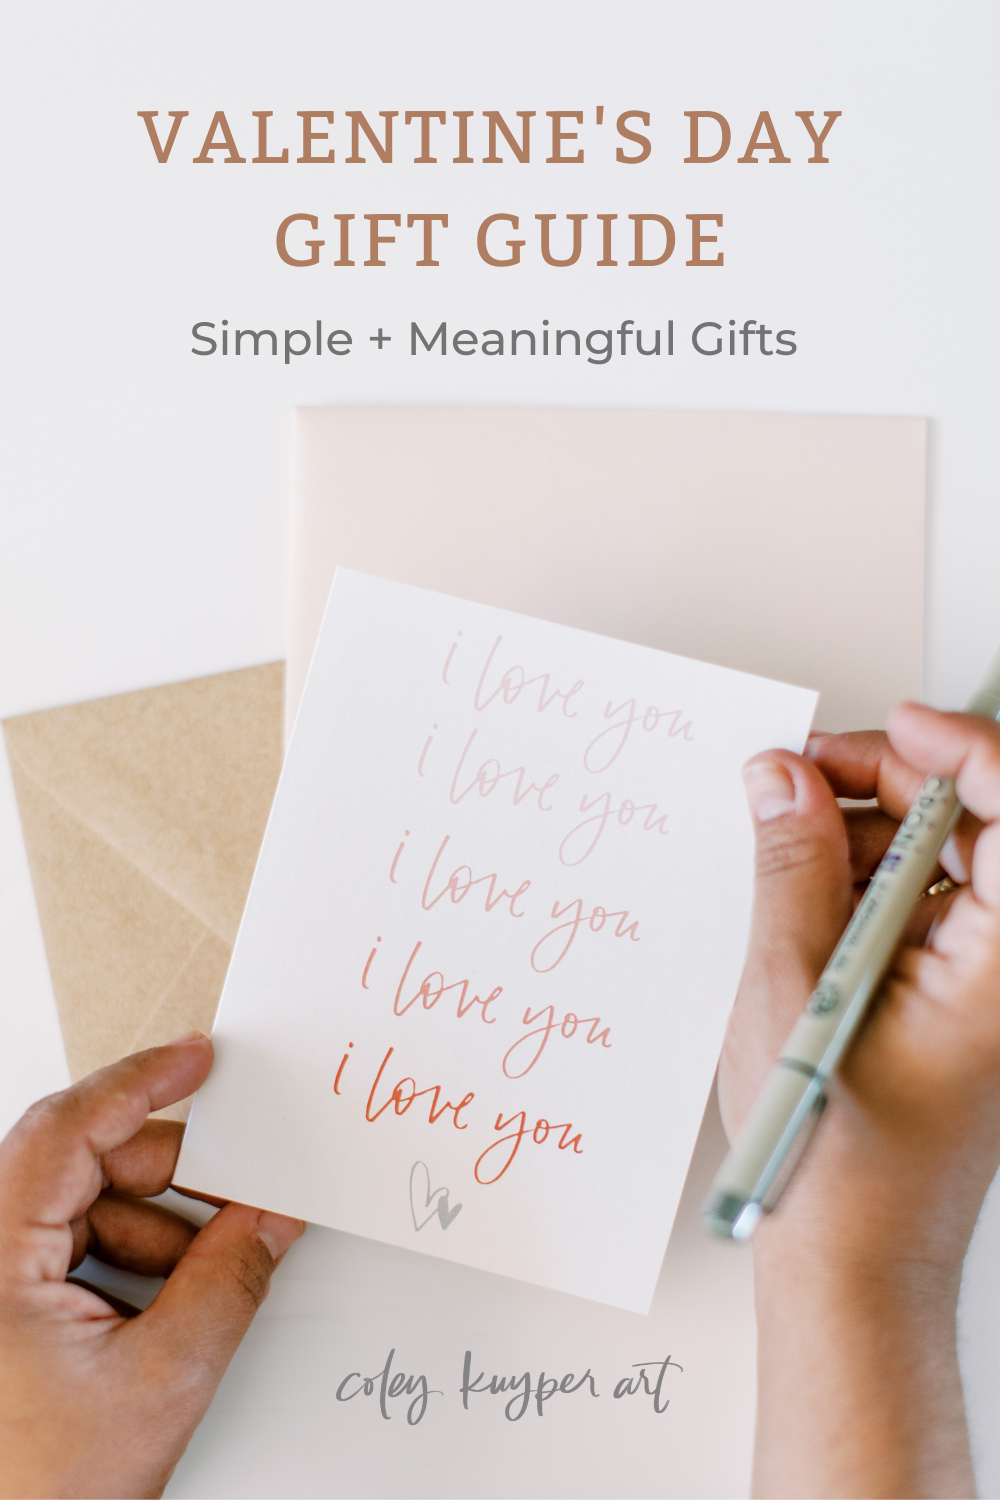 text for pinterest post hand holding greeting cards